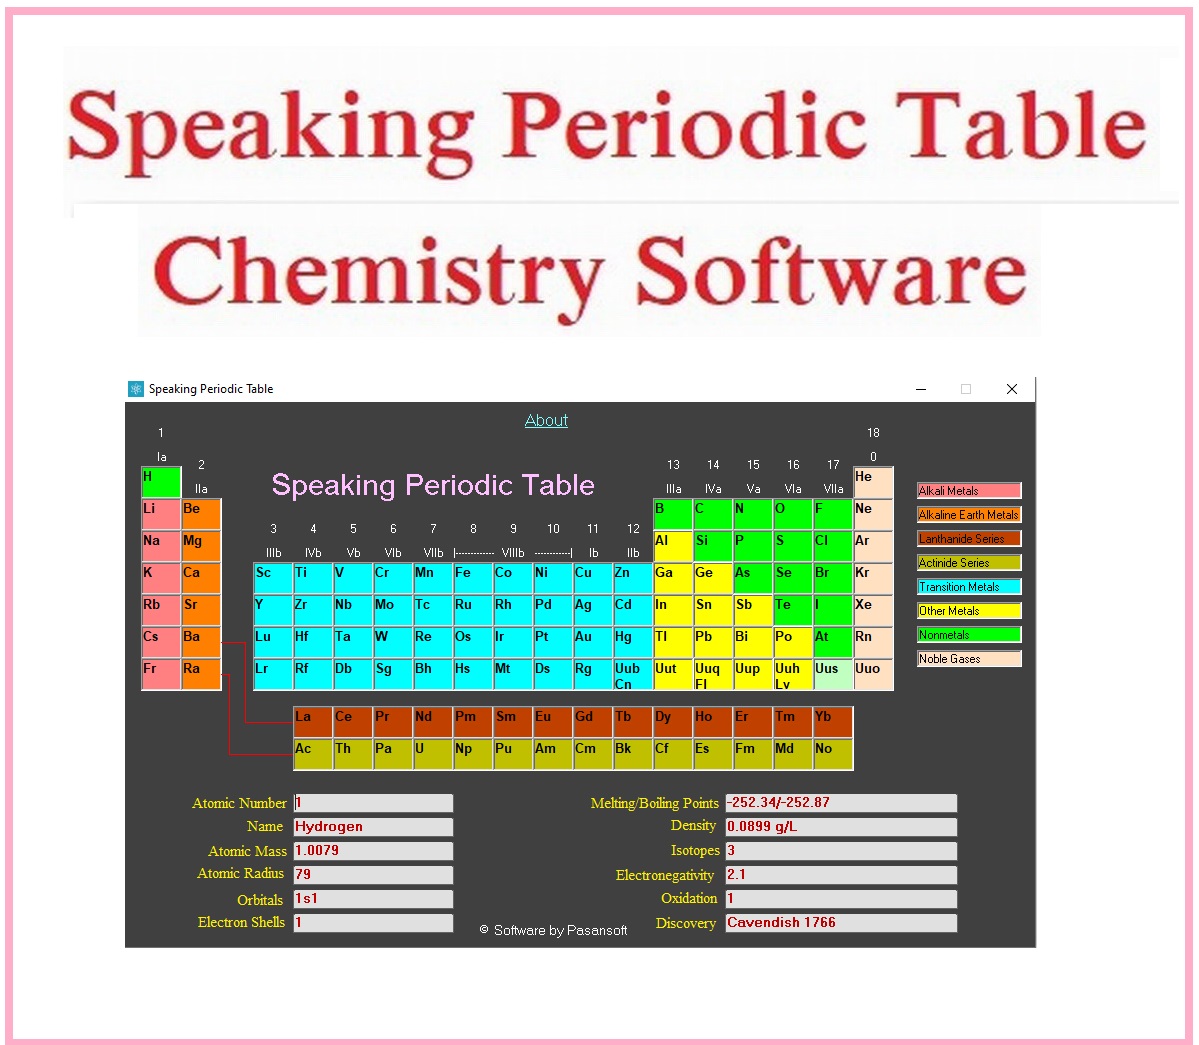 Speaking Periodic Table Software